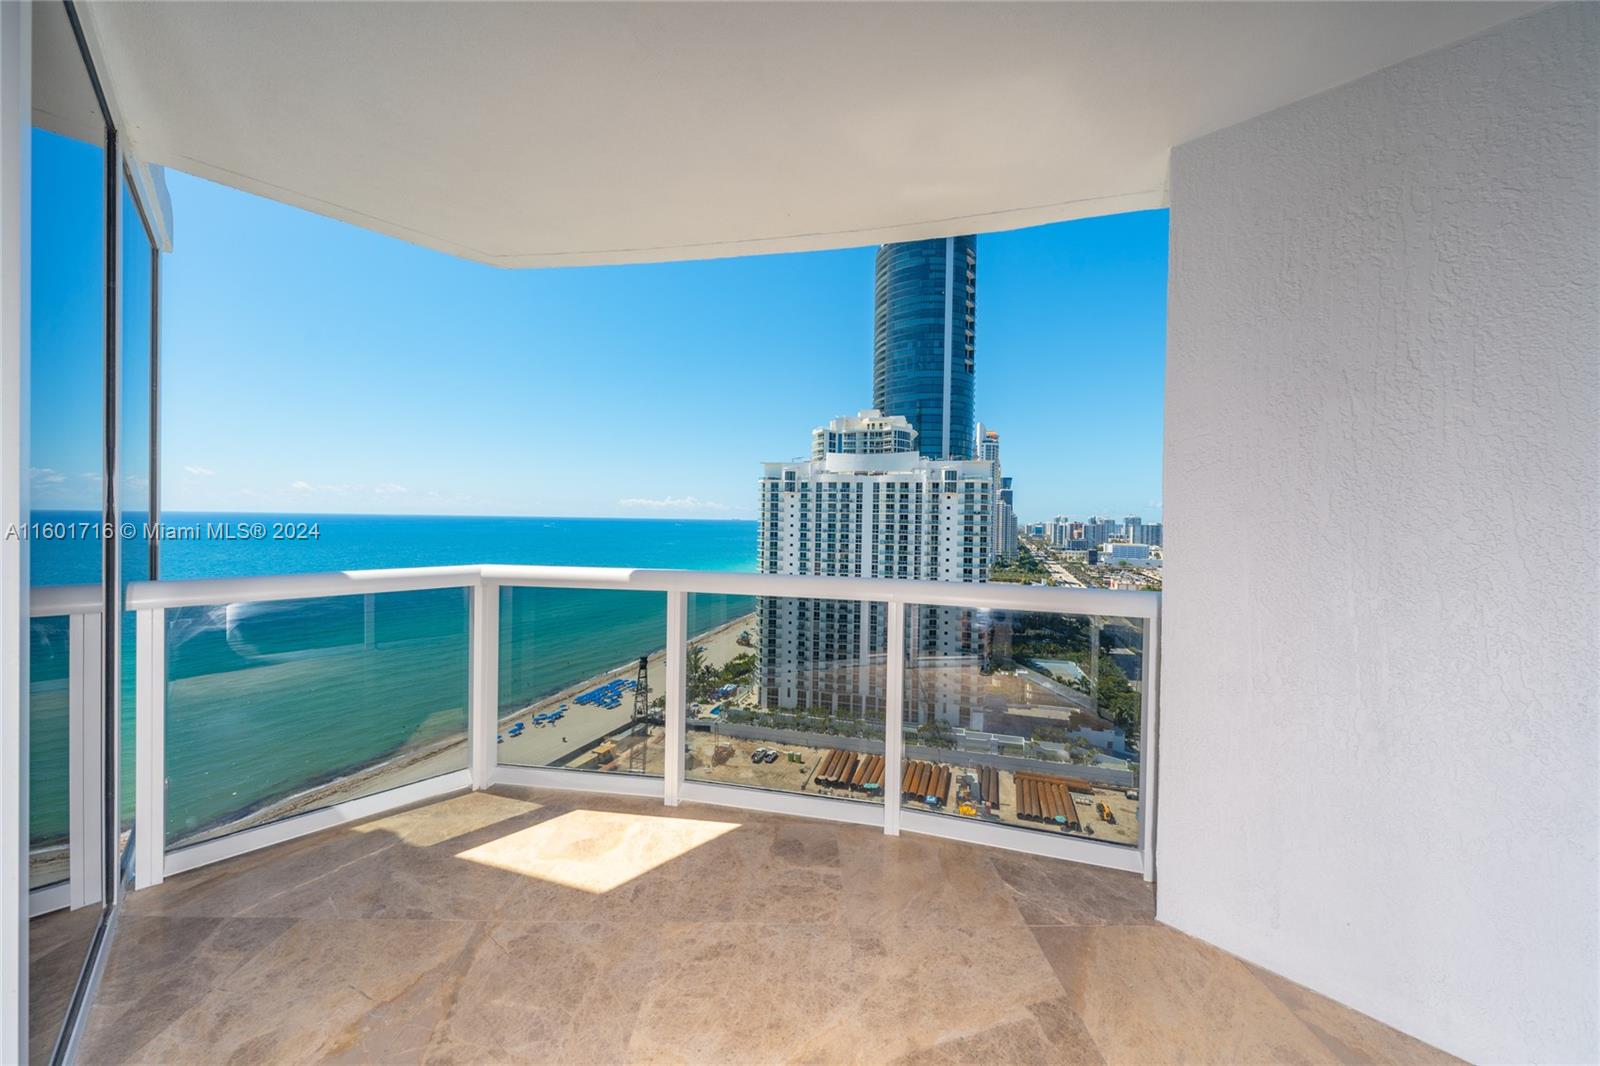 This magnificent 3 bed. 3 1/2 bath. SE corner residence offers one of the best layouts paired with the most amazing panoramic view in South Florida, overlooking the ocean, bay and city of Sunny Isles. The unit features three bedrooms in-suite with a powder room accessible by private elevator. Many upgrades, including marble flooring throughout, custom made high end built-ins with exotic wood, elegant Murano glass light fixtures, electric screens and more. Property offers lots of amenities including: recently renovated pool deck area w/swimming pool, hot tub, spa, tennis courts, restaurant, community room and roof top deck. Services included: Beach service, 24-hour security, full concierge and valet. Walking distance to shopping, restaurants, K-8 school and house of worship.